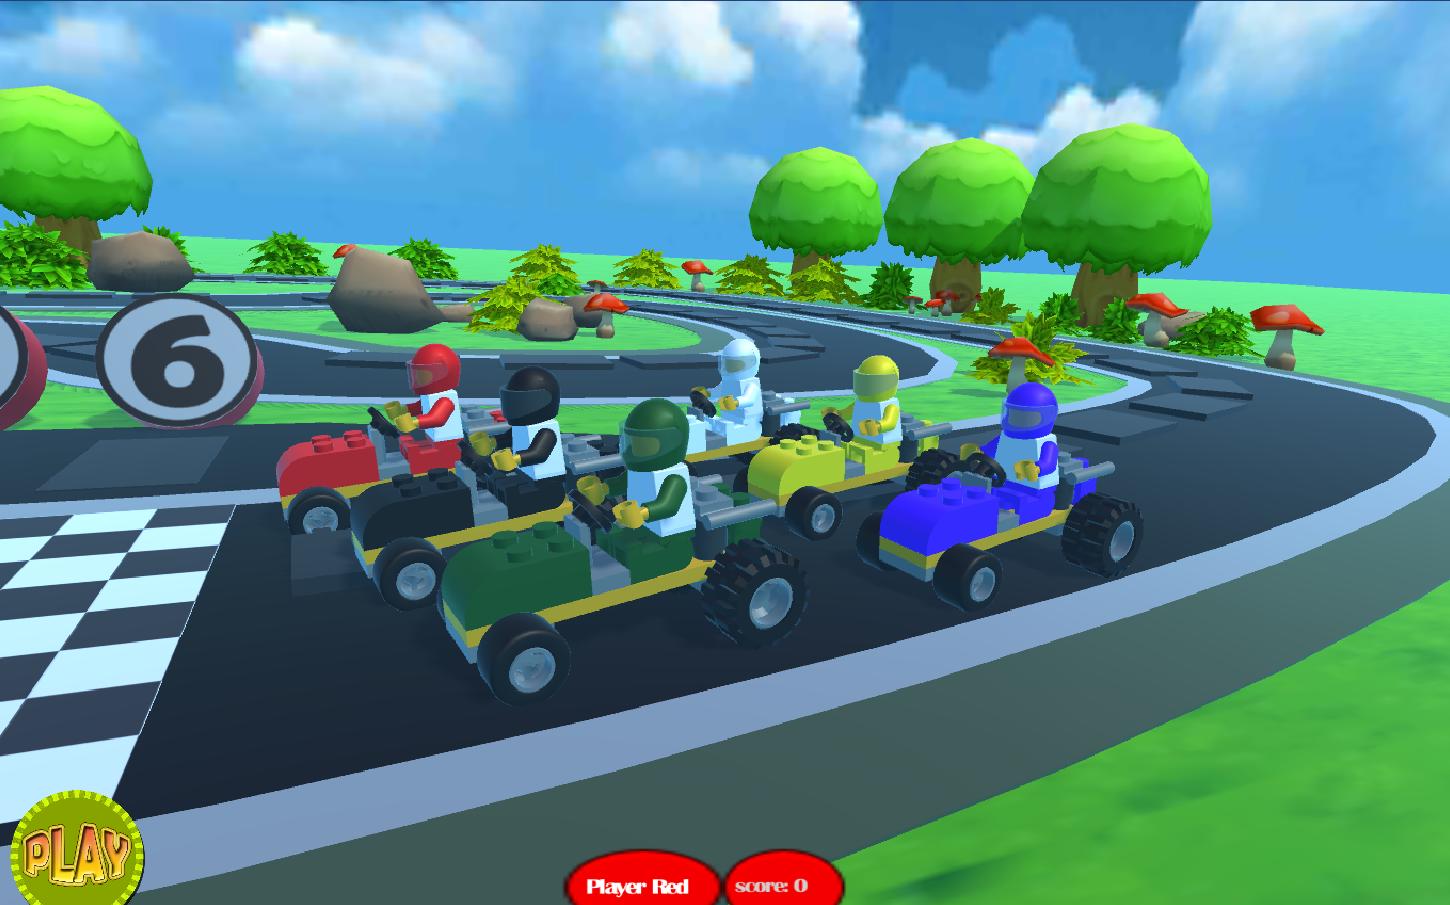 Lego Race for Android - APK Download